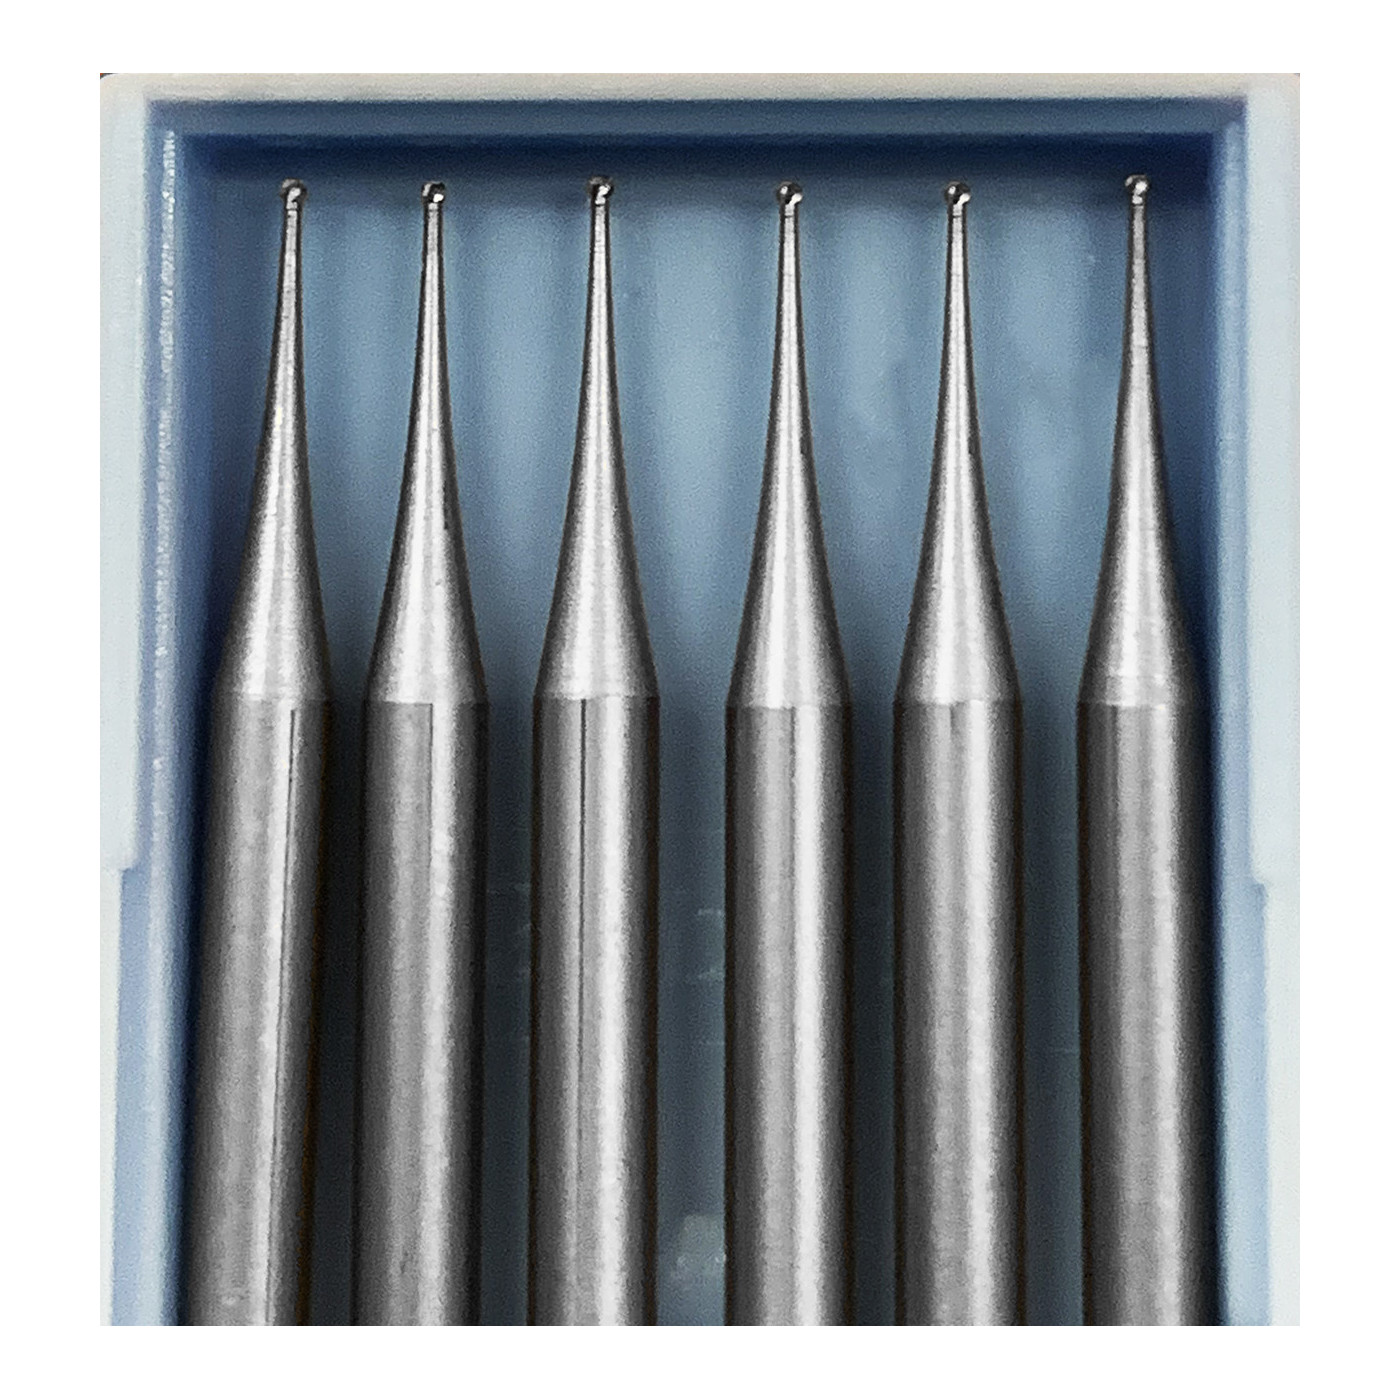 6 HSS mini milling cutters, 1.0x40 mm (ball nose only)